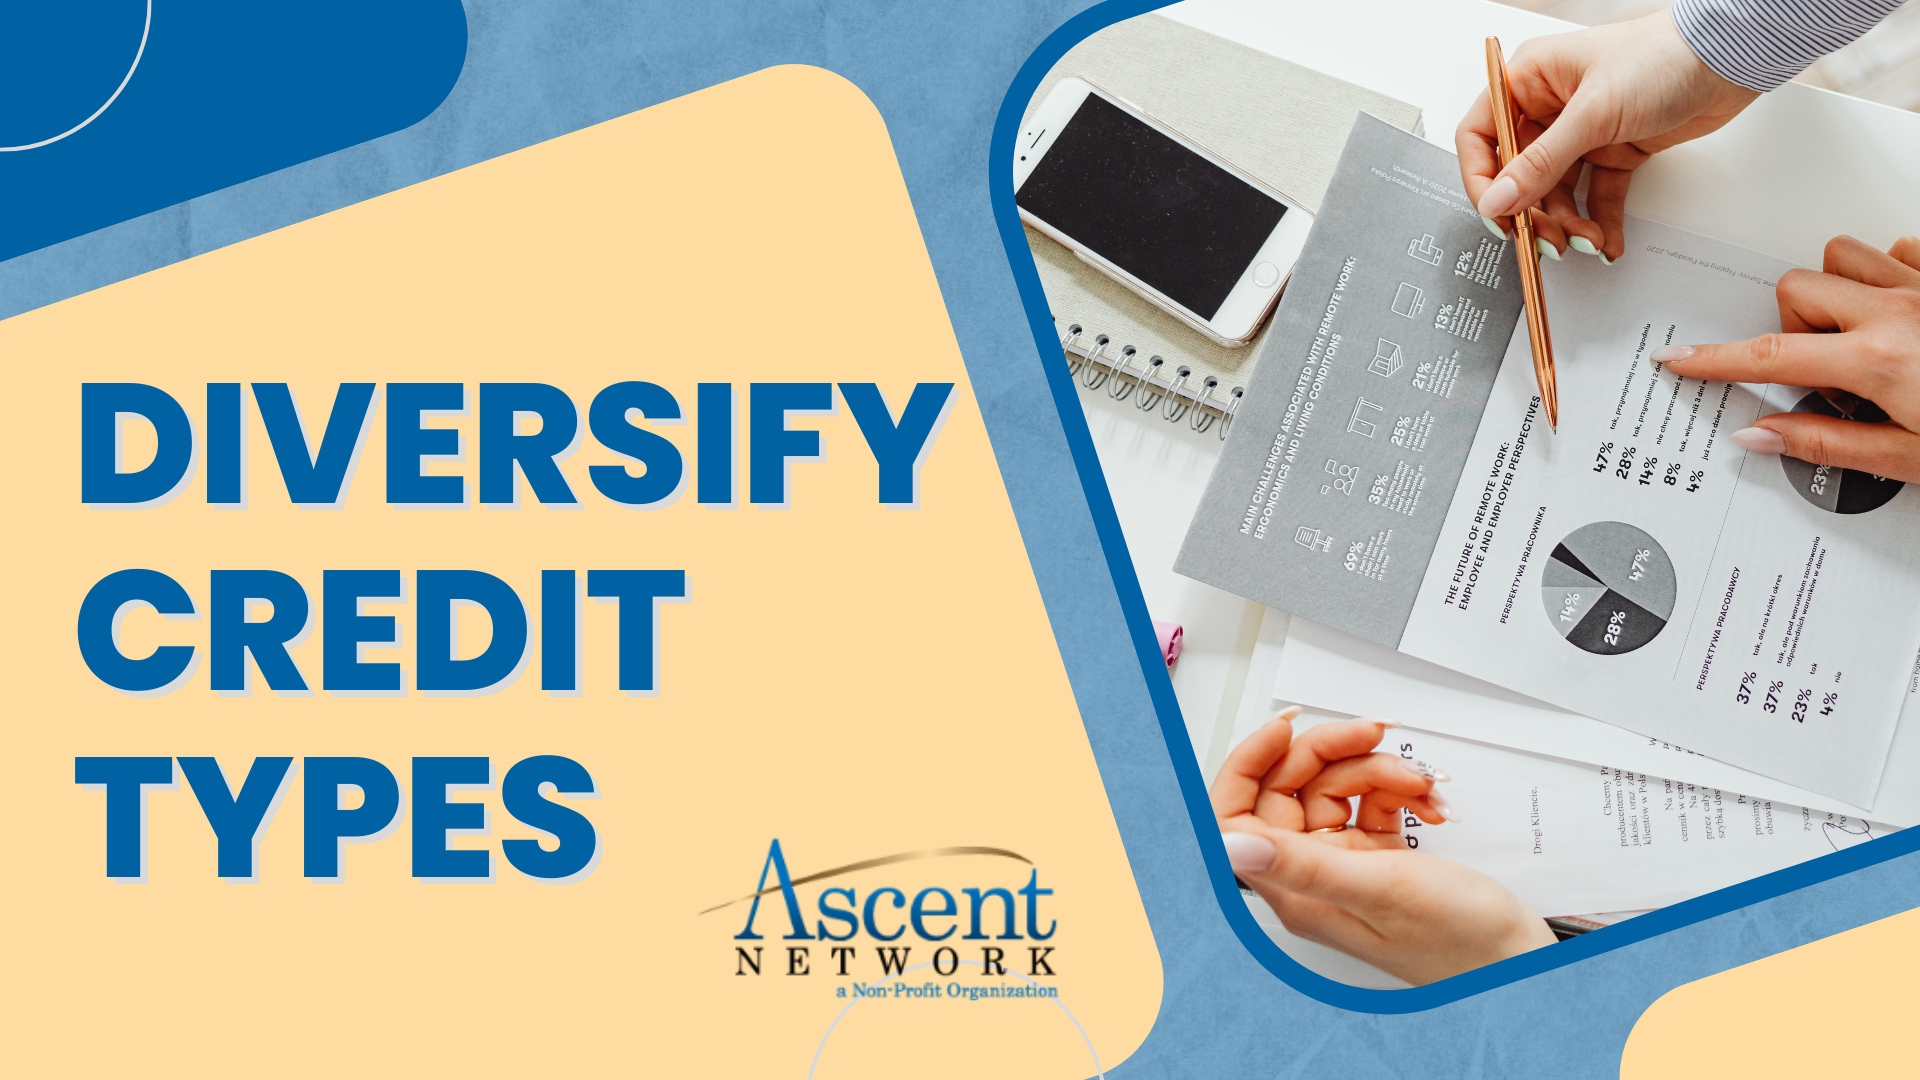 Diversify Credit Types: A Smart Move for Small Business Owners